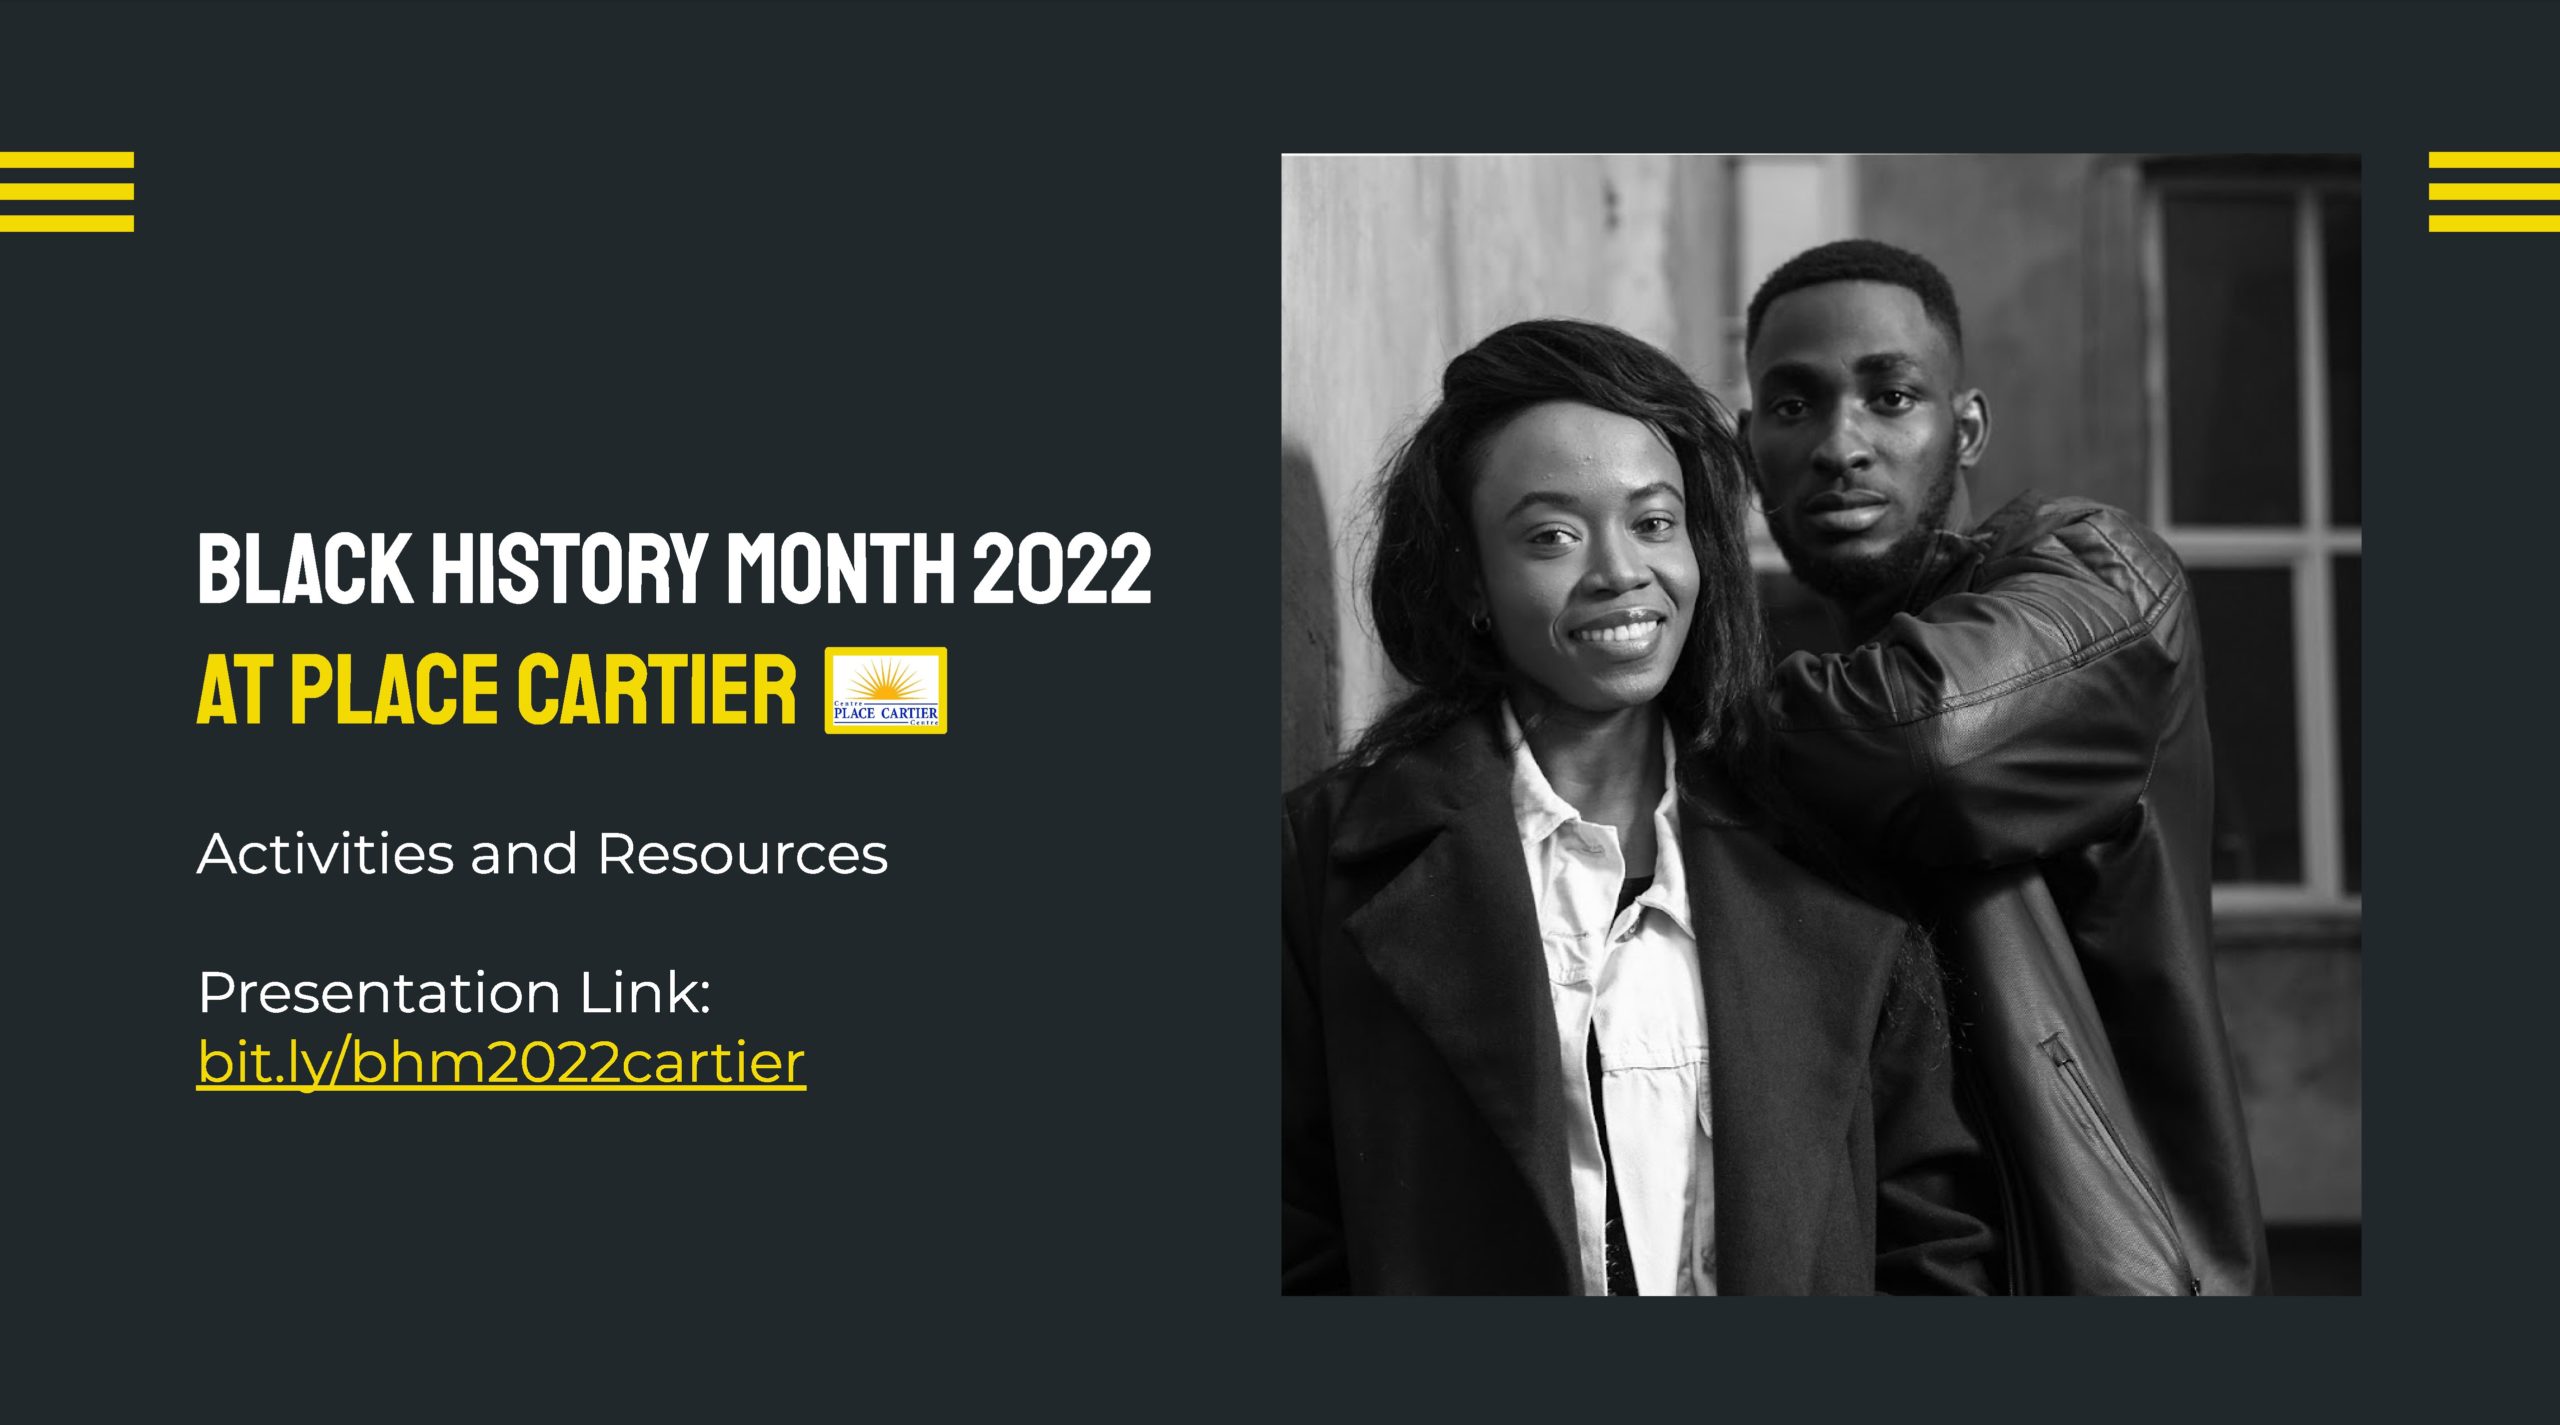 Black History Month at Place Cartier